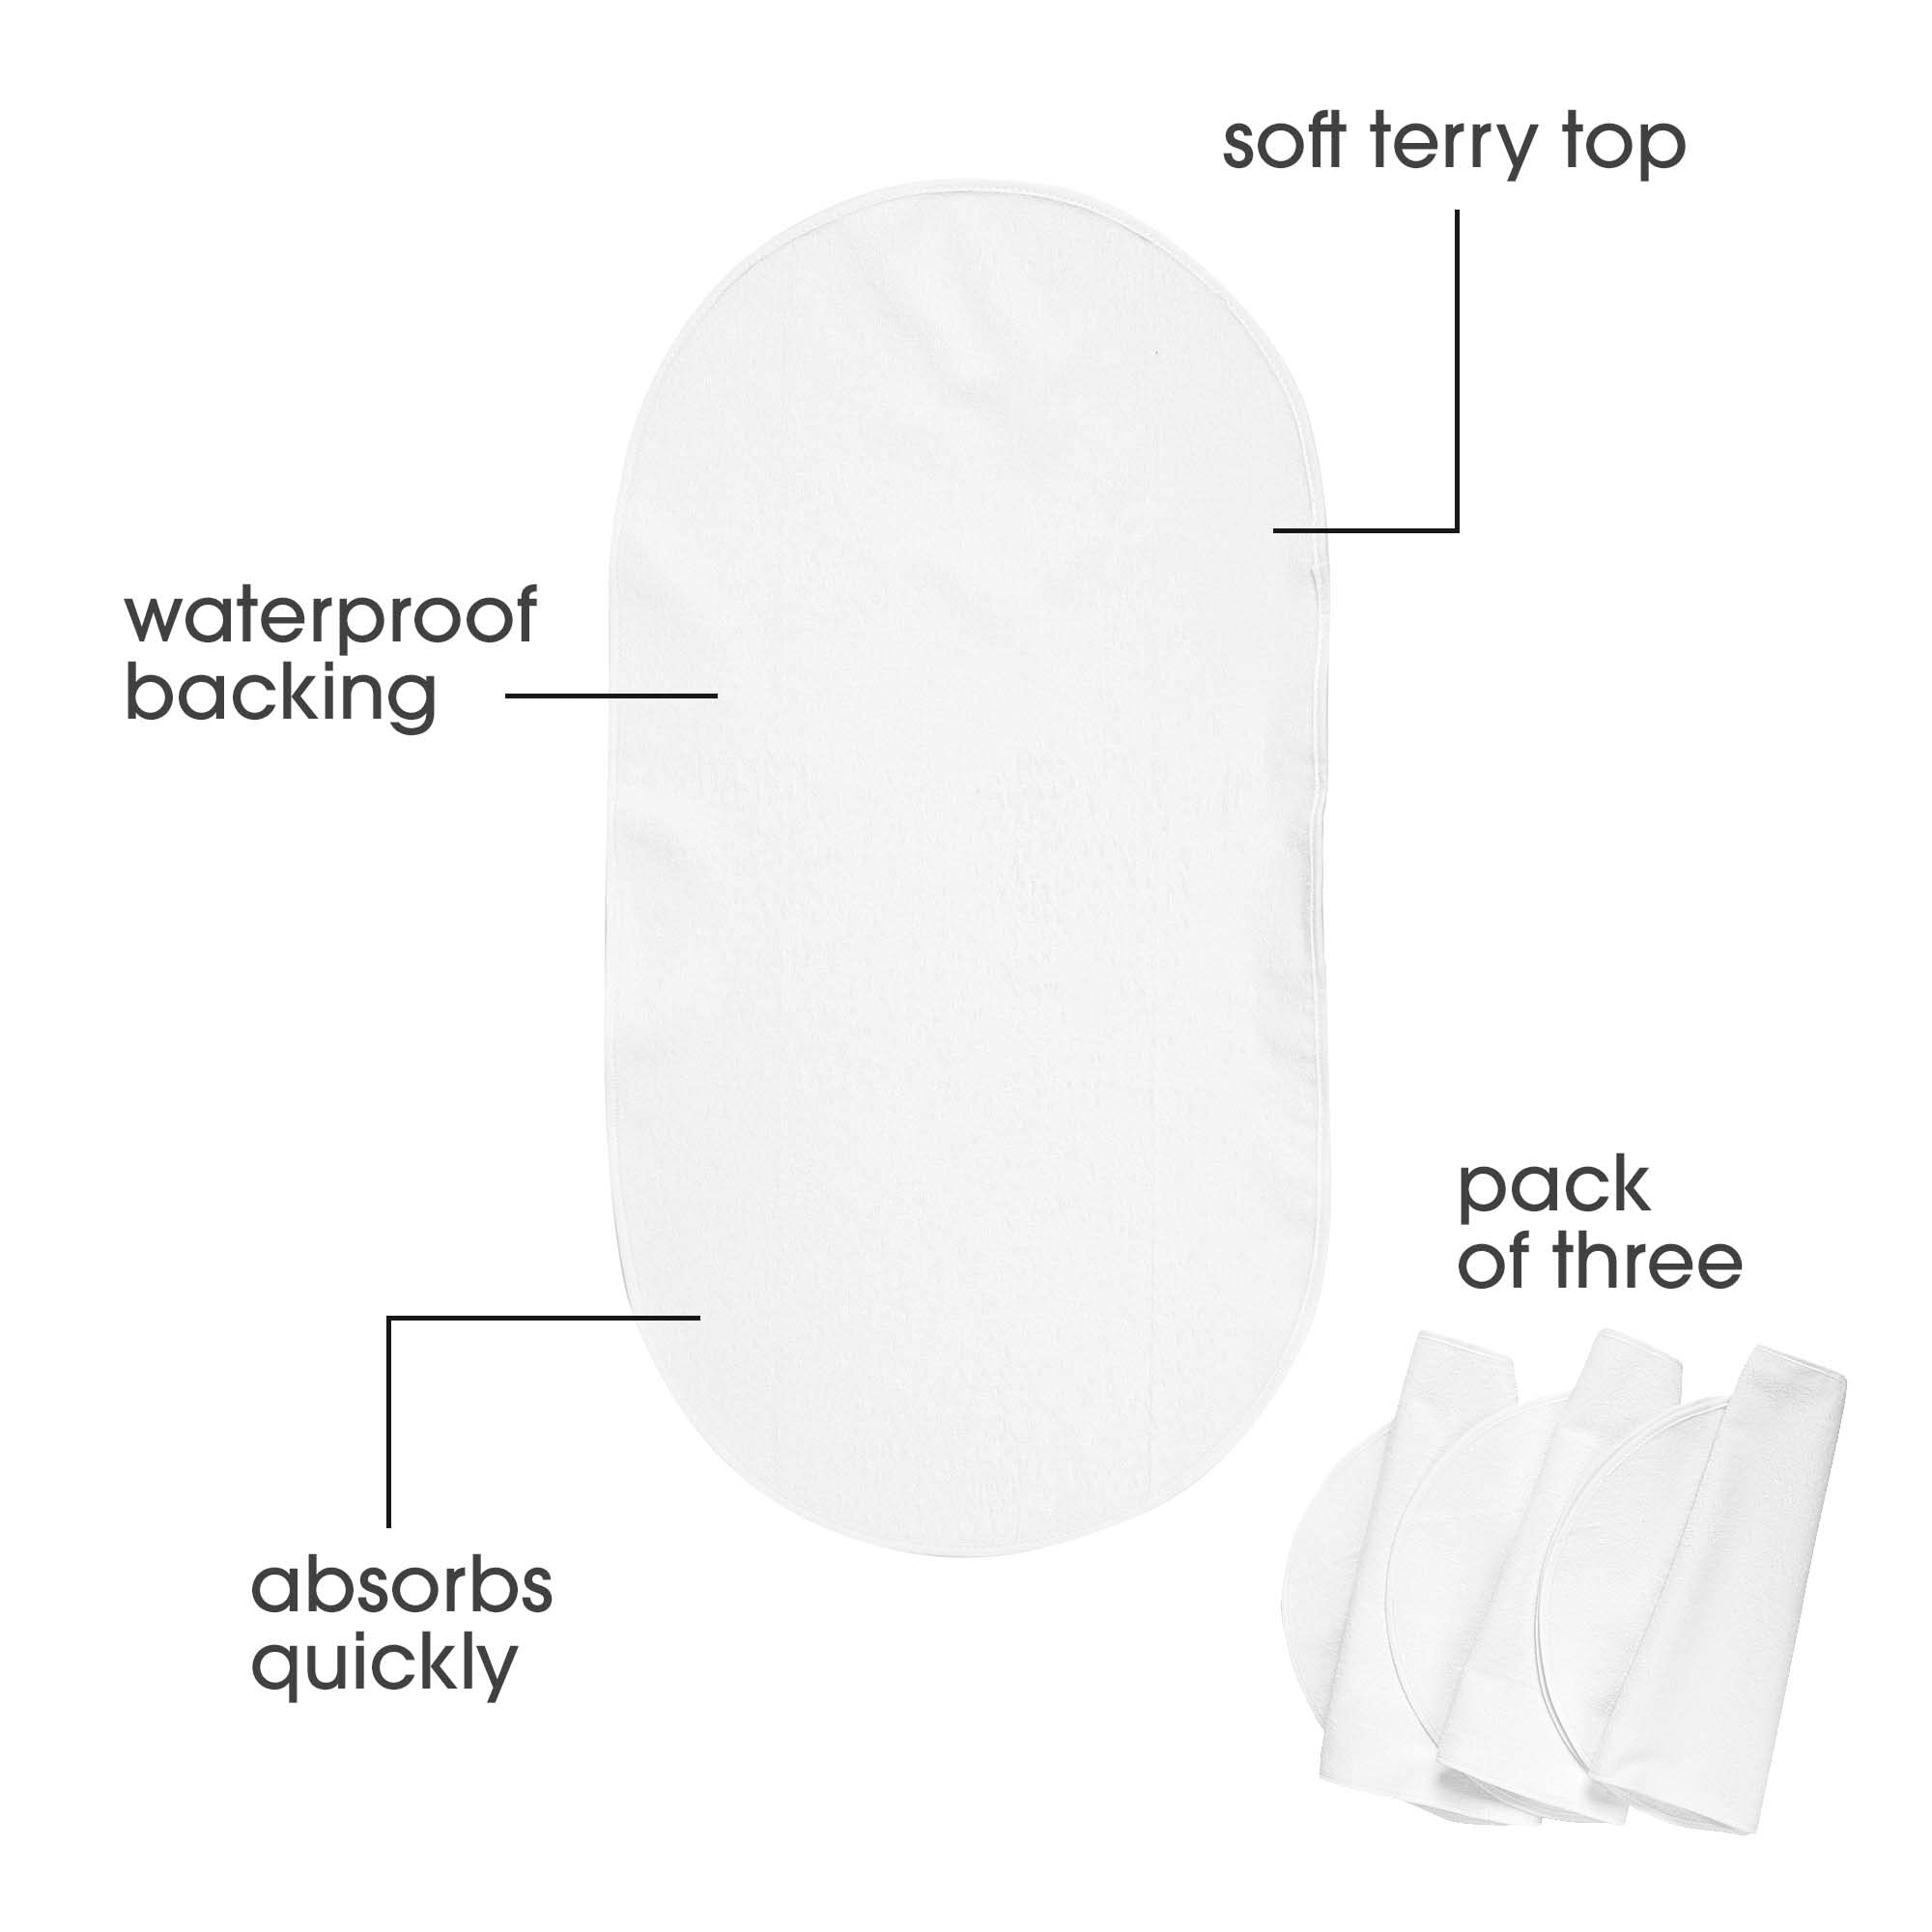 Boppy Changing Pad Liners, Pack of 3, White, Soft Terrycloth with Waterproof Backing Makes Wiggly Diaper Changes Easier and Comfy, For Quicker Cleanup of Changing Pads, Machine Washable and Dryable